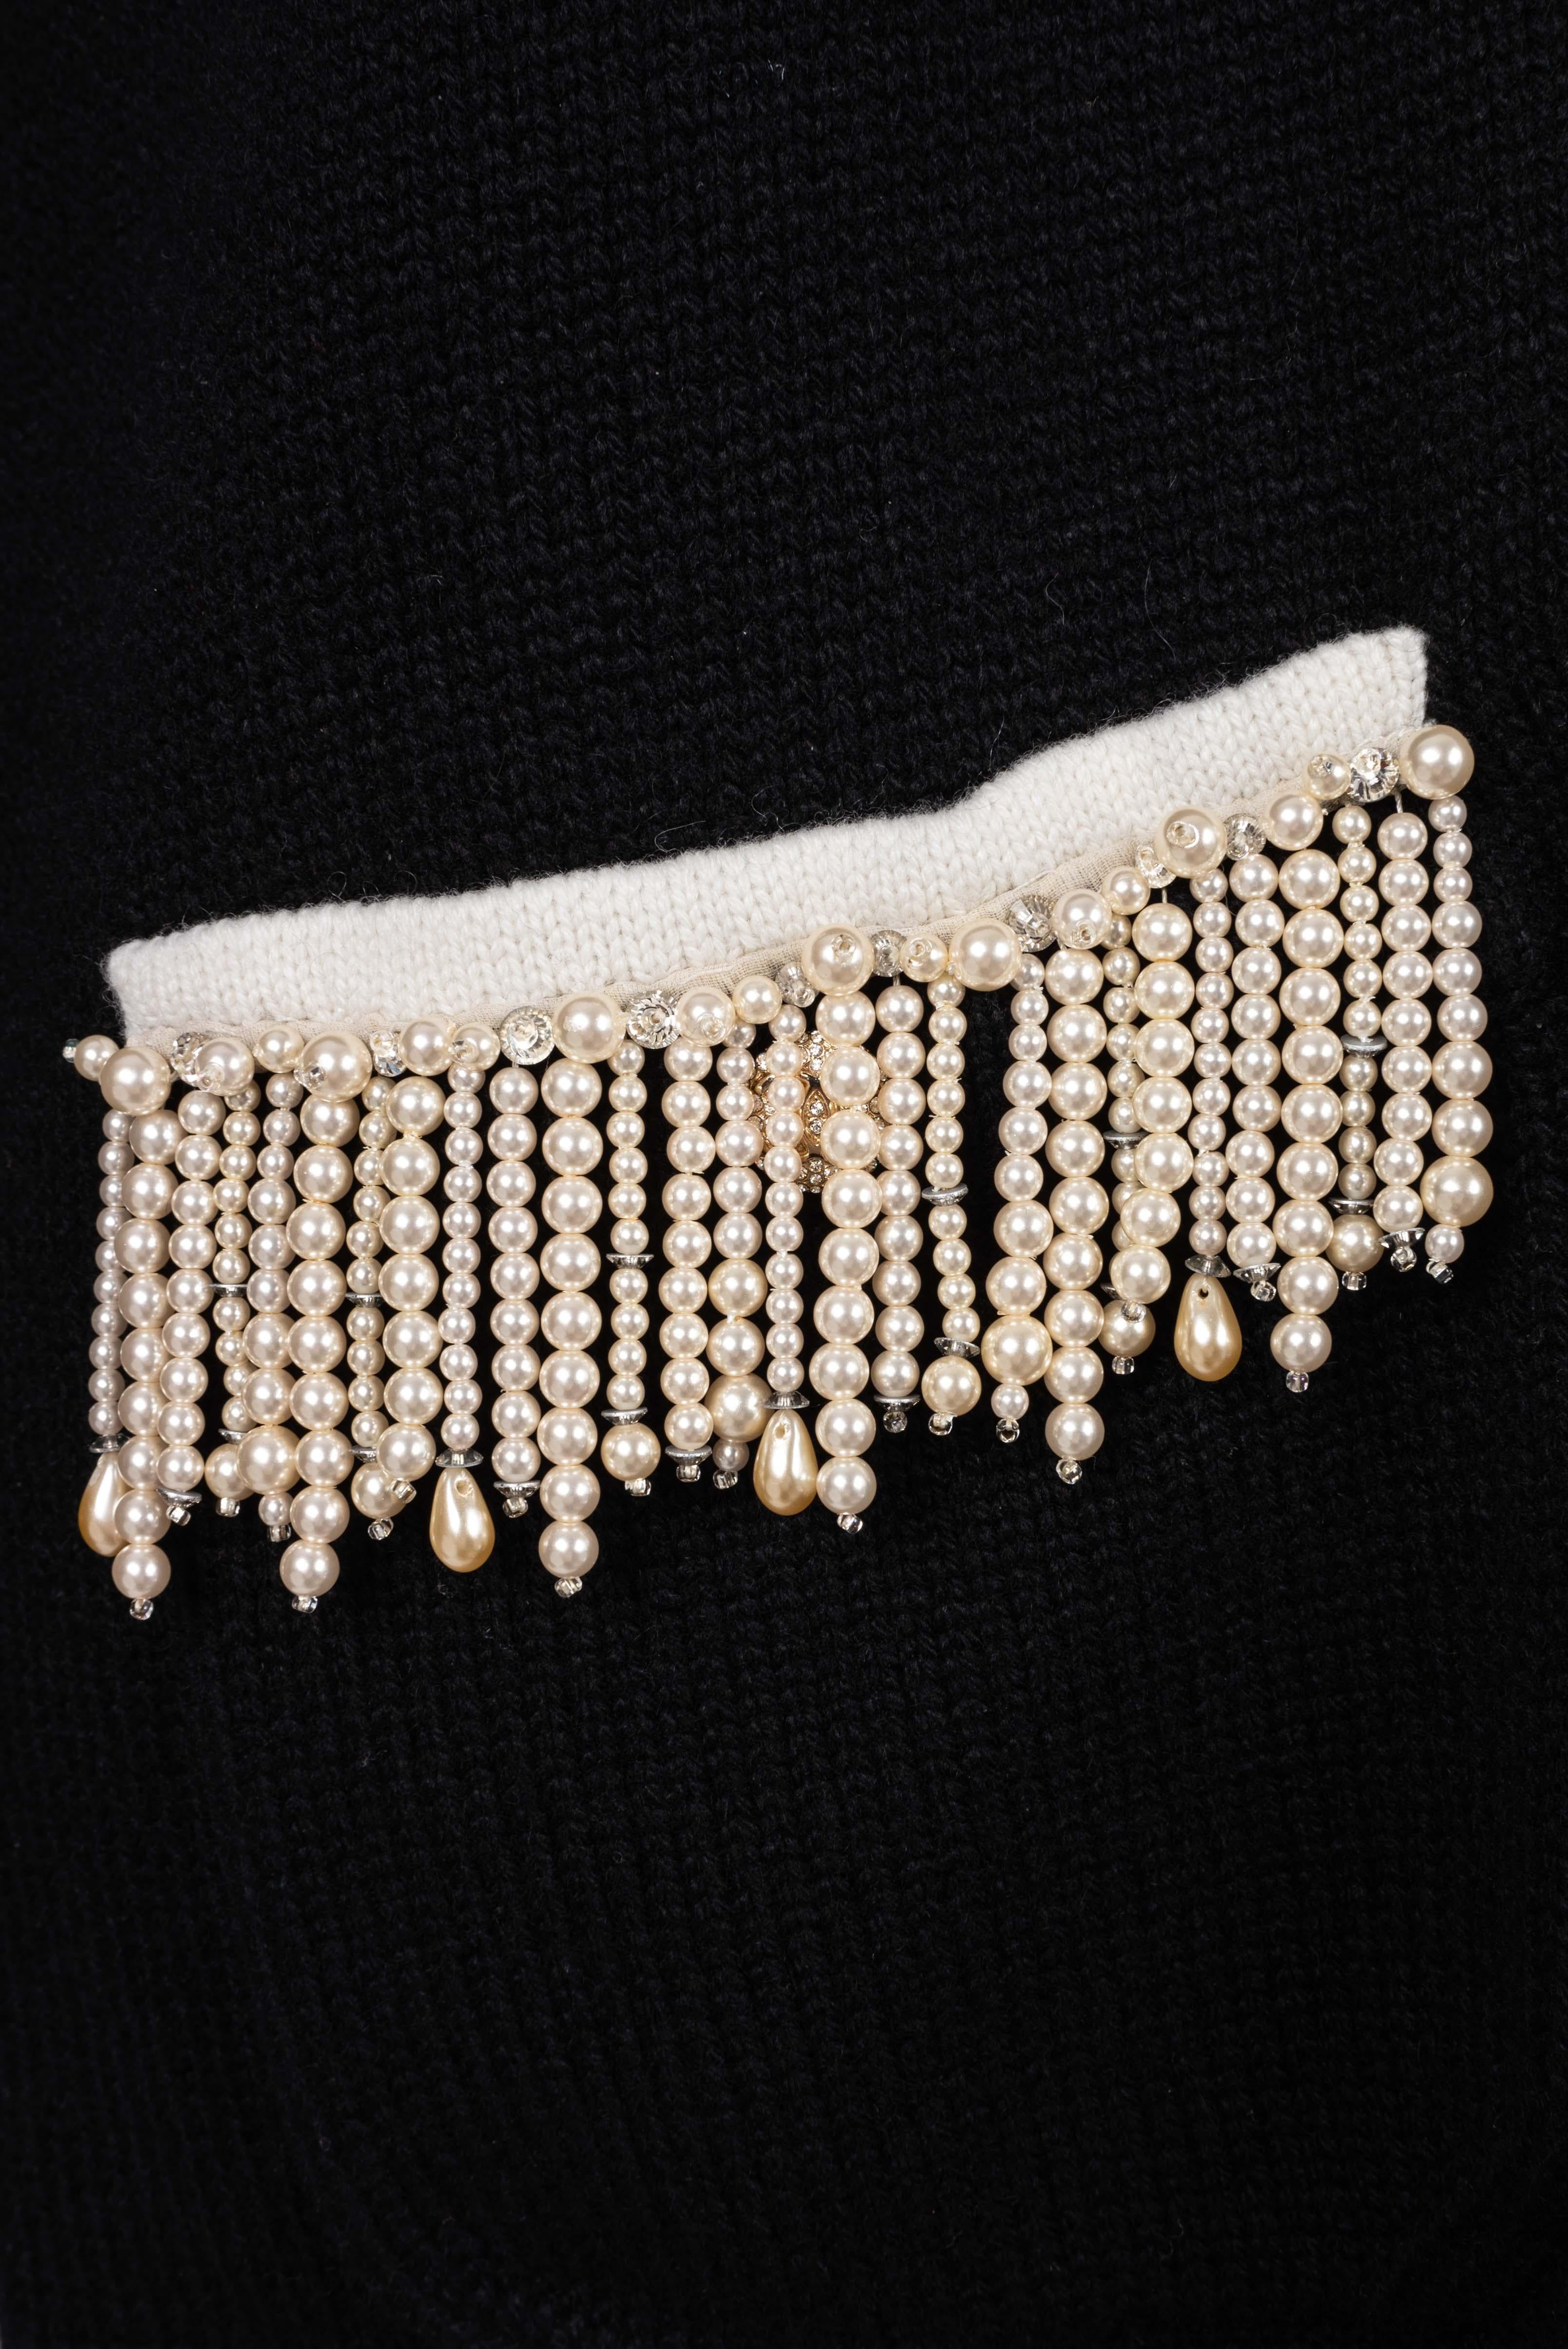 Chanel cardigan with pearls 2021 3